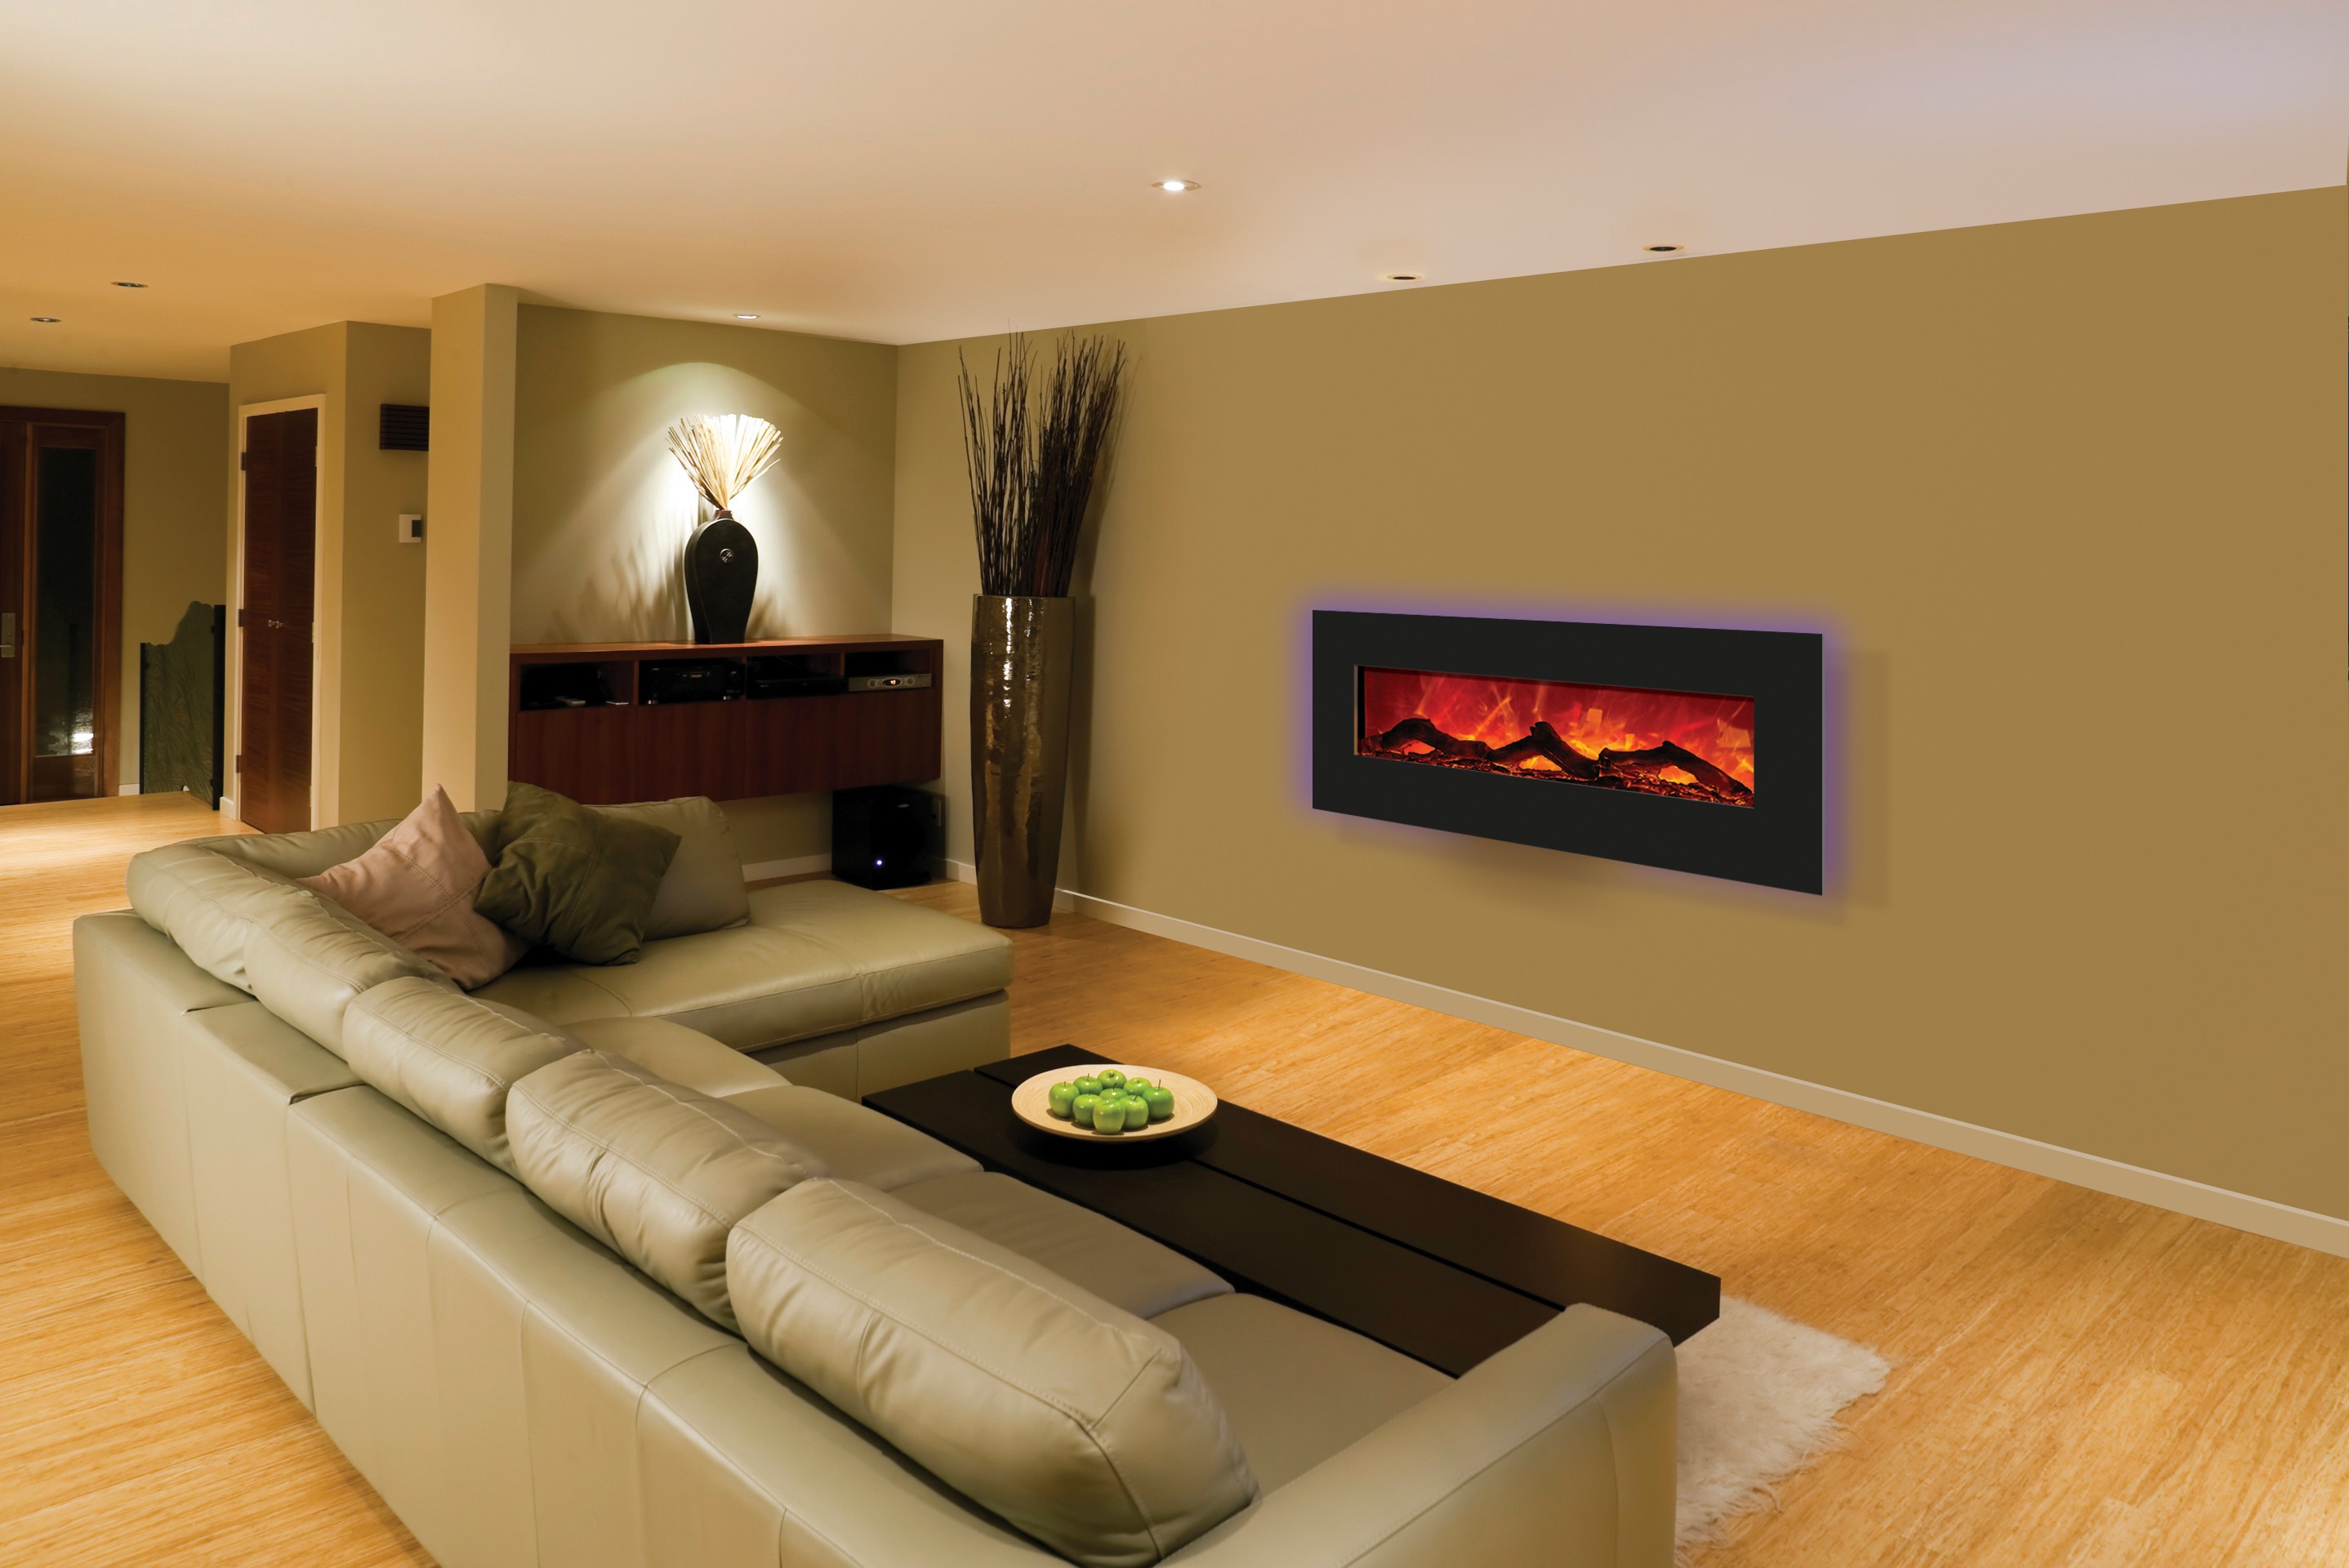 Inexpensive Electric Fireplaces Inspirational Cool Electric Fireplace Ideas Fireplace Design Ideas